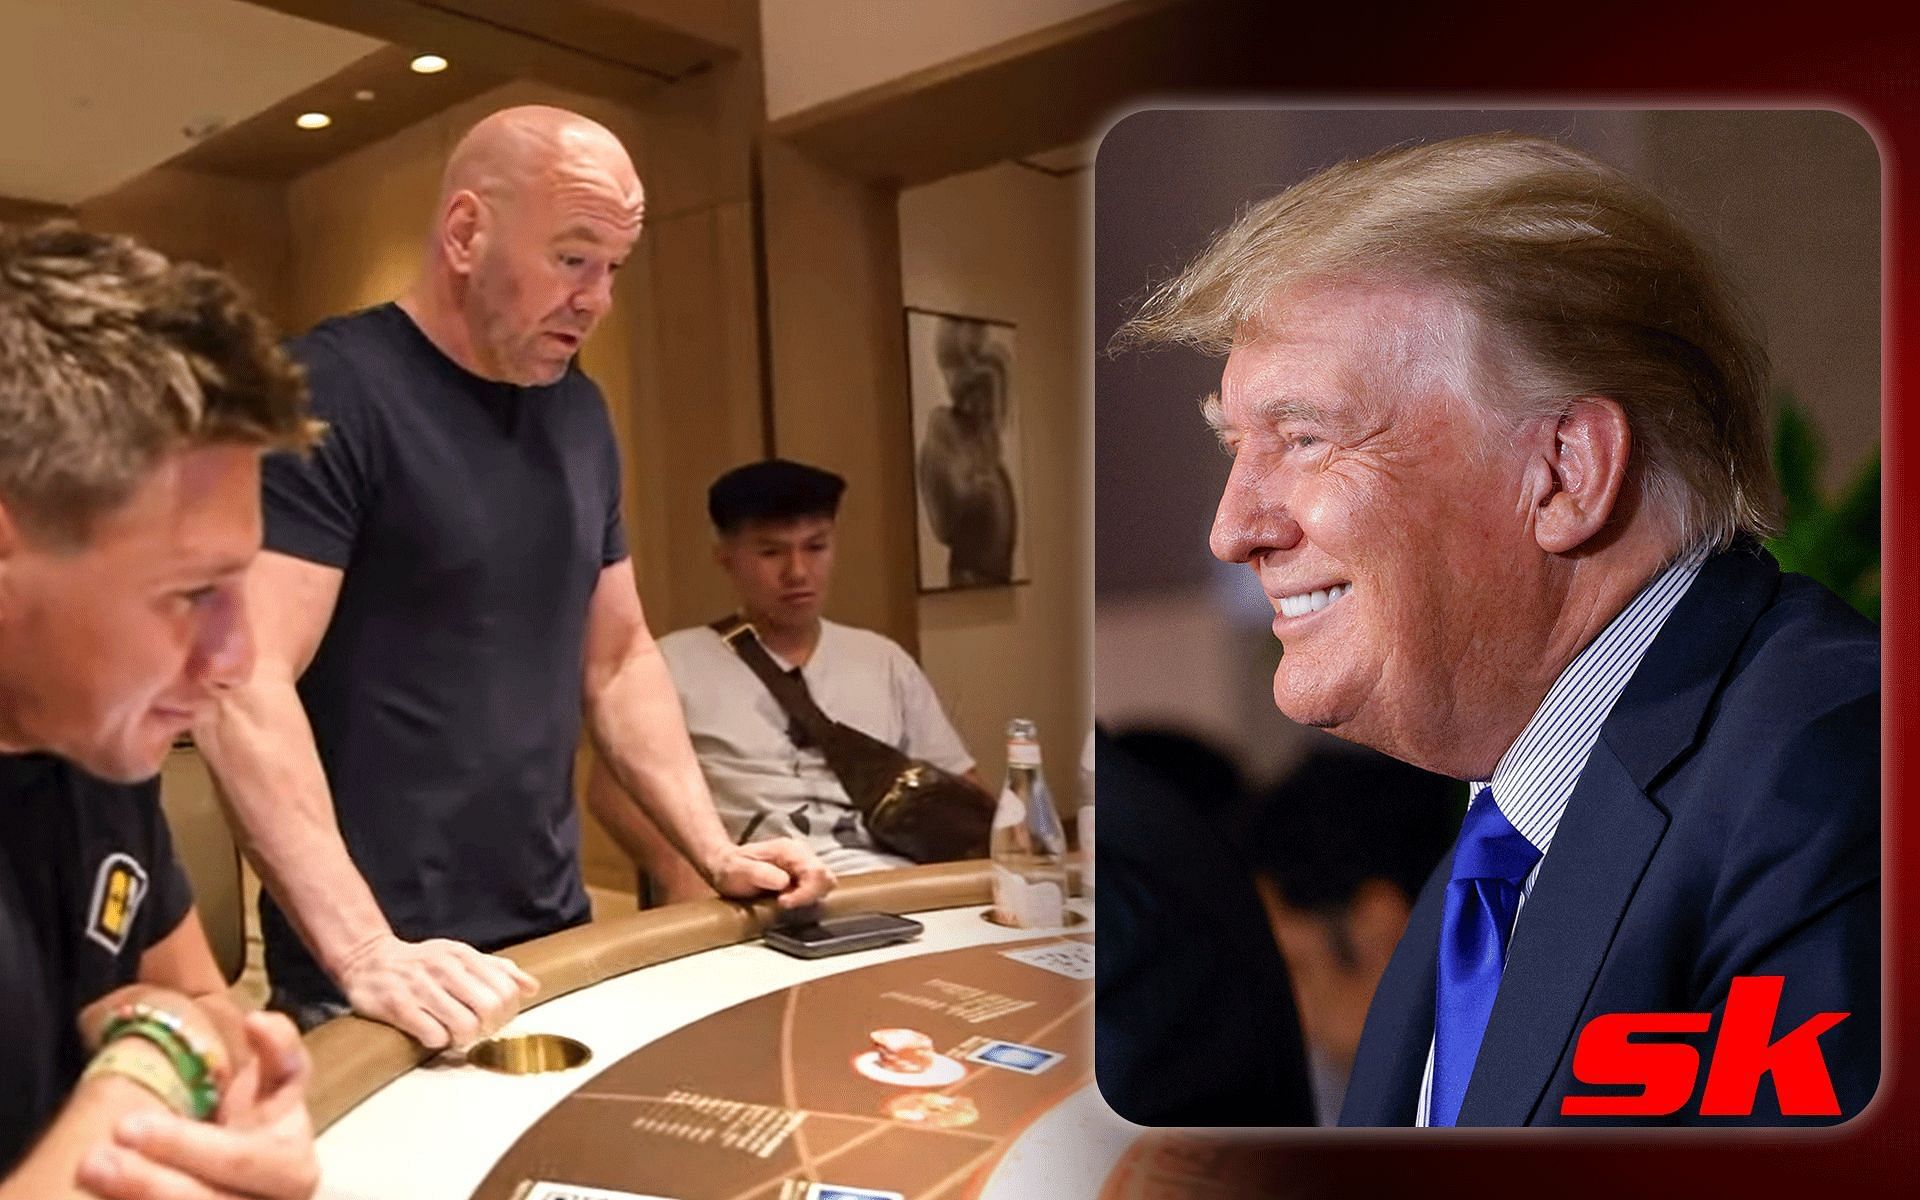 Dana White (L) and Donald Trump (Inset) (Donald Trump Image via Getty and Dana White Image via fronto YouTube channel)